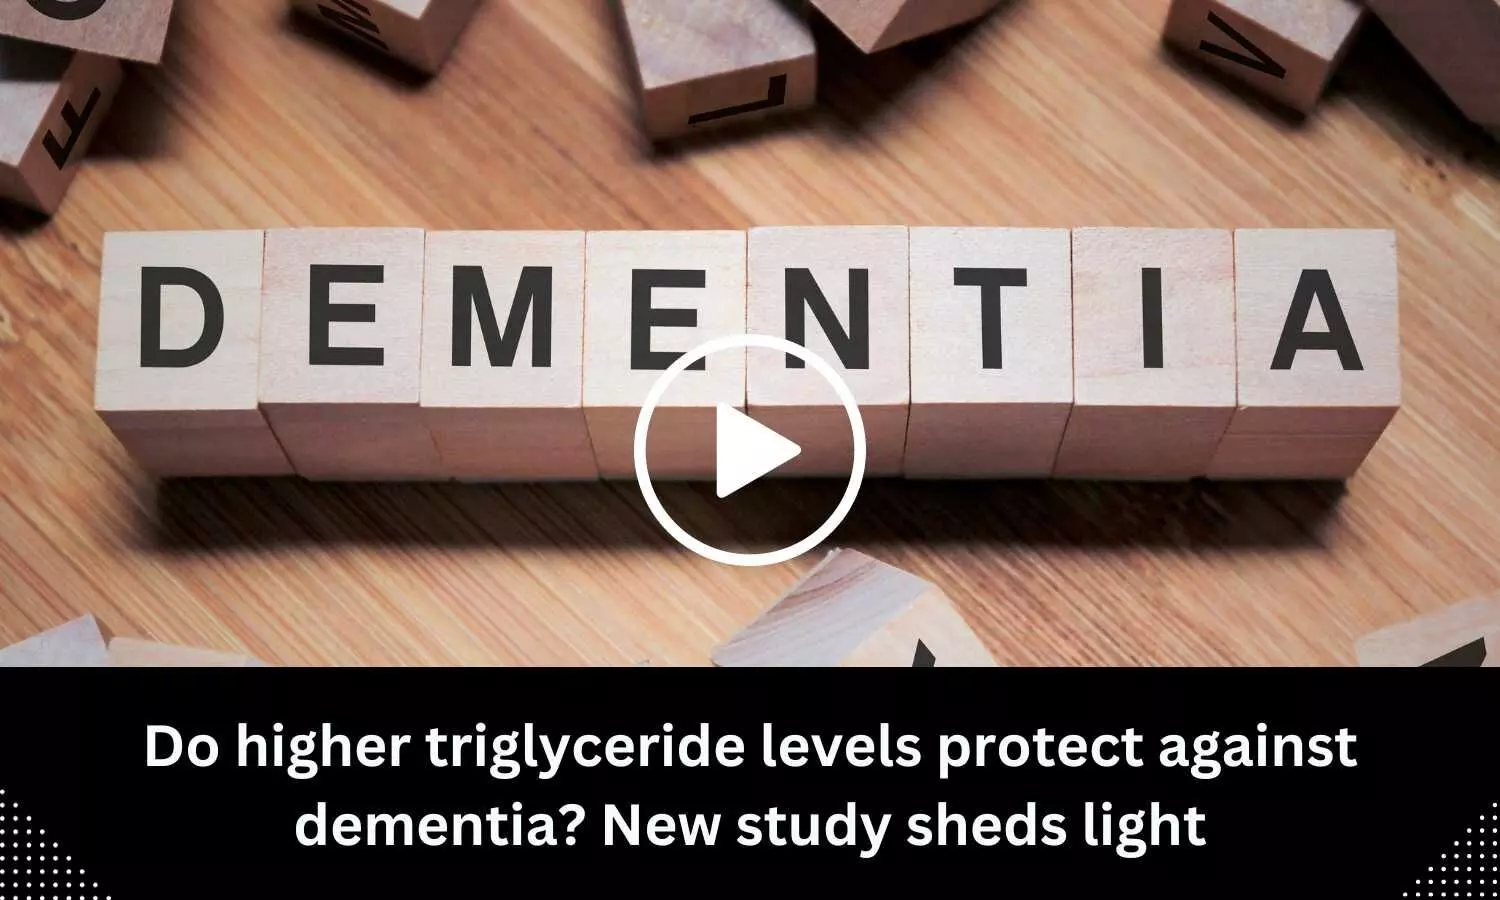 Do higher triglyceride levels protect against dementia? New study sheds light